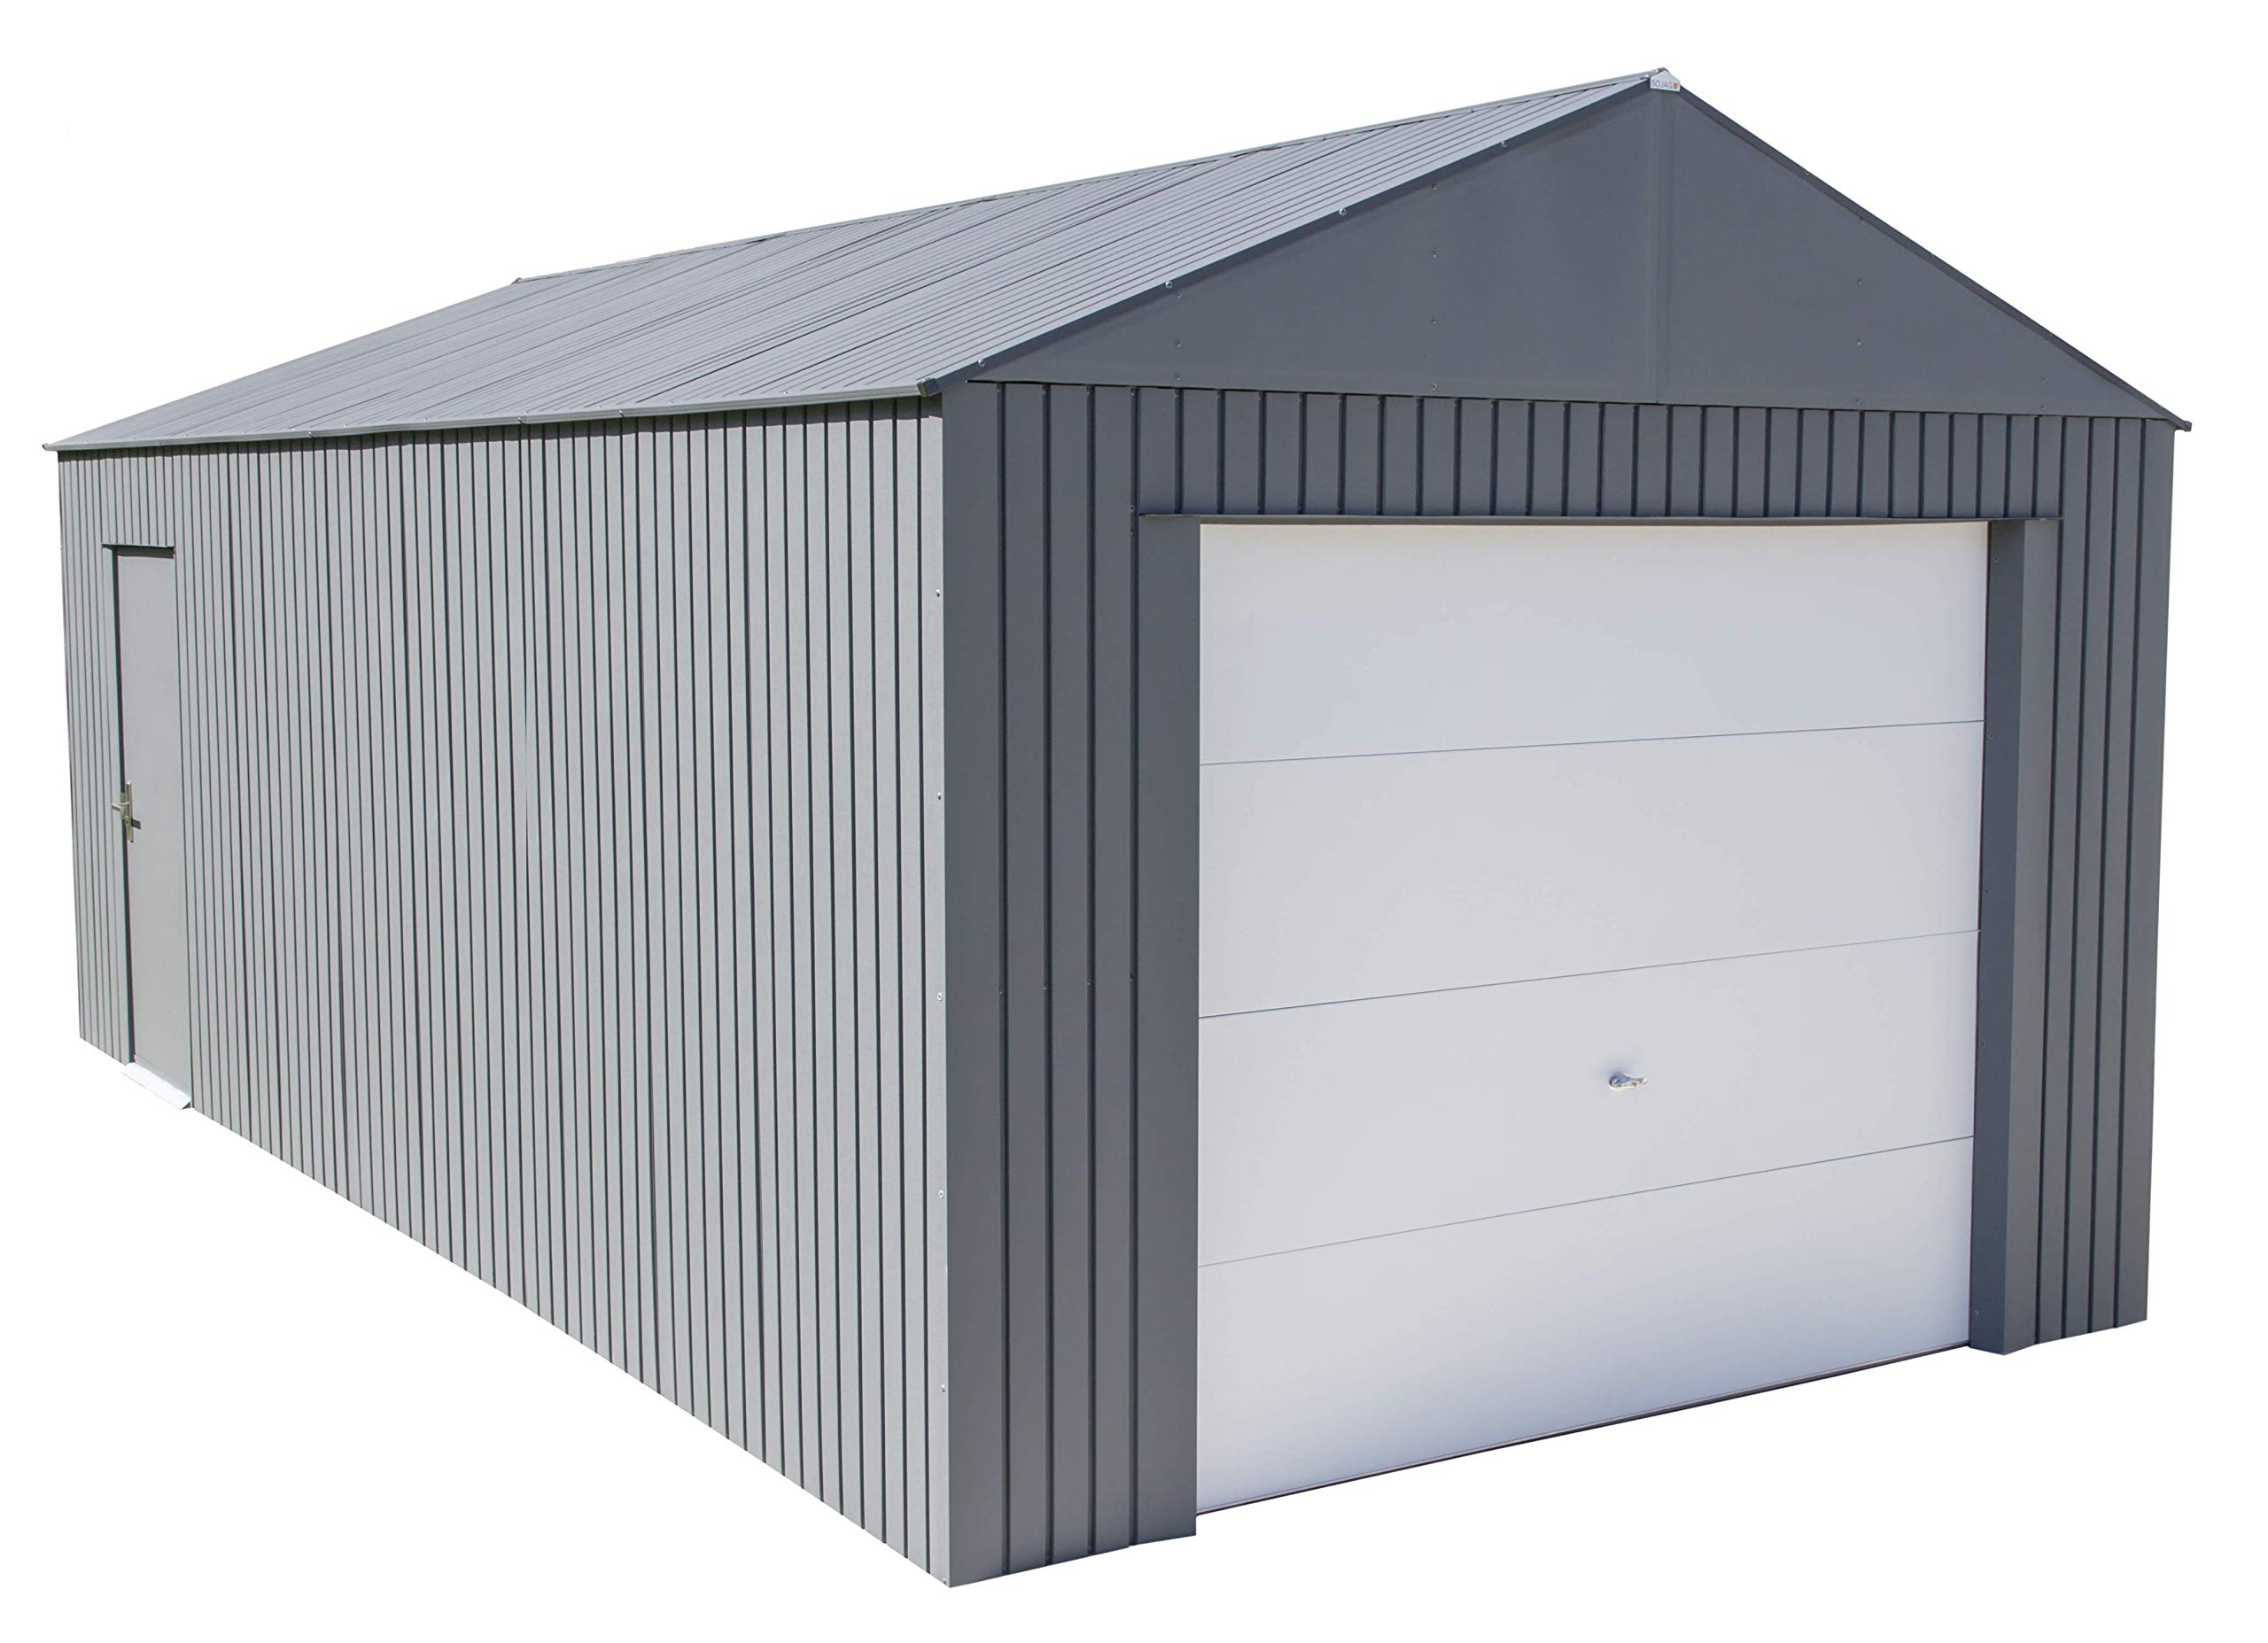 EVEREST GARAGE 12 X 25 FT. IN CHARCOAL